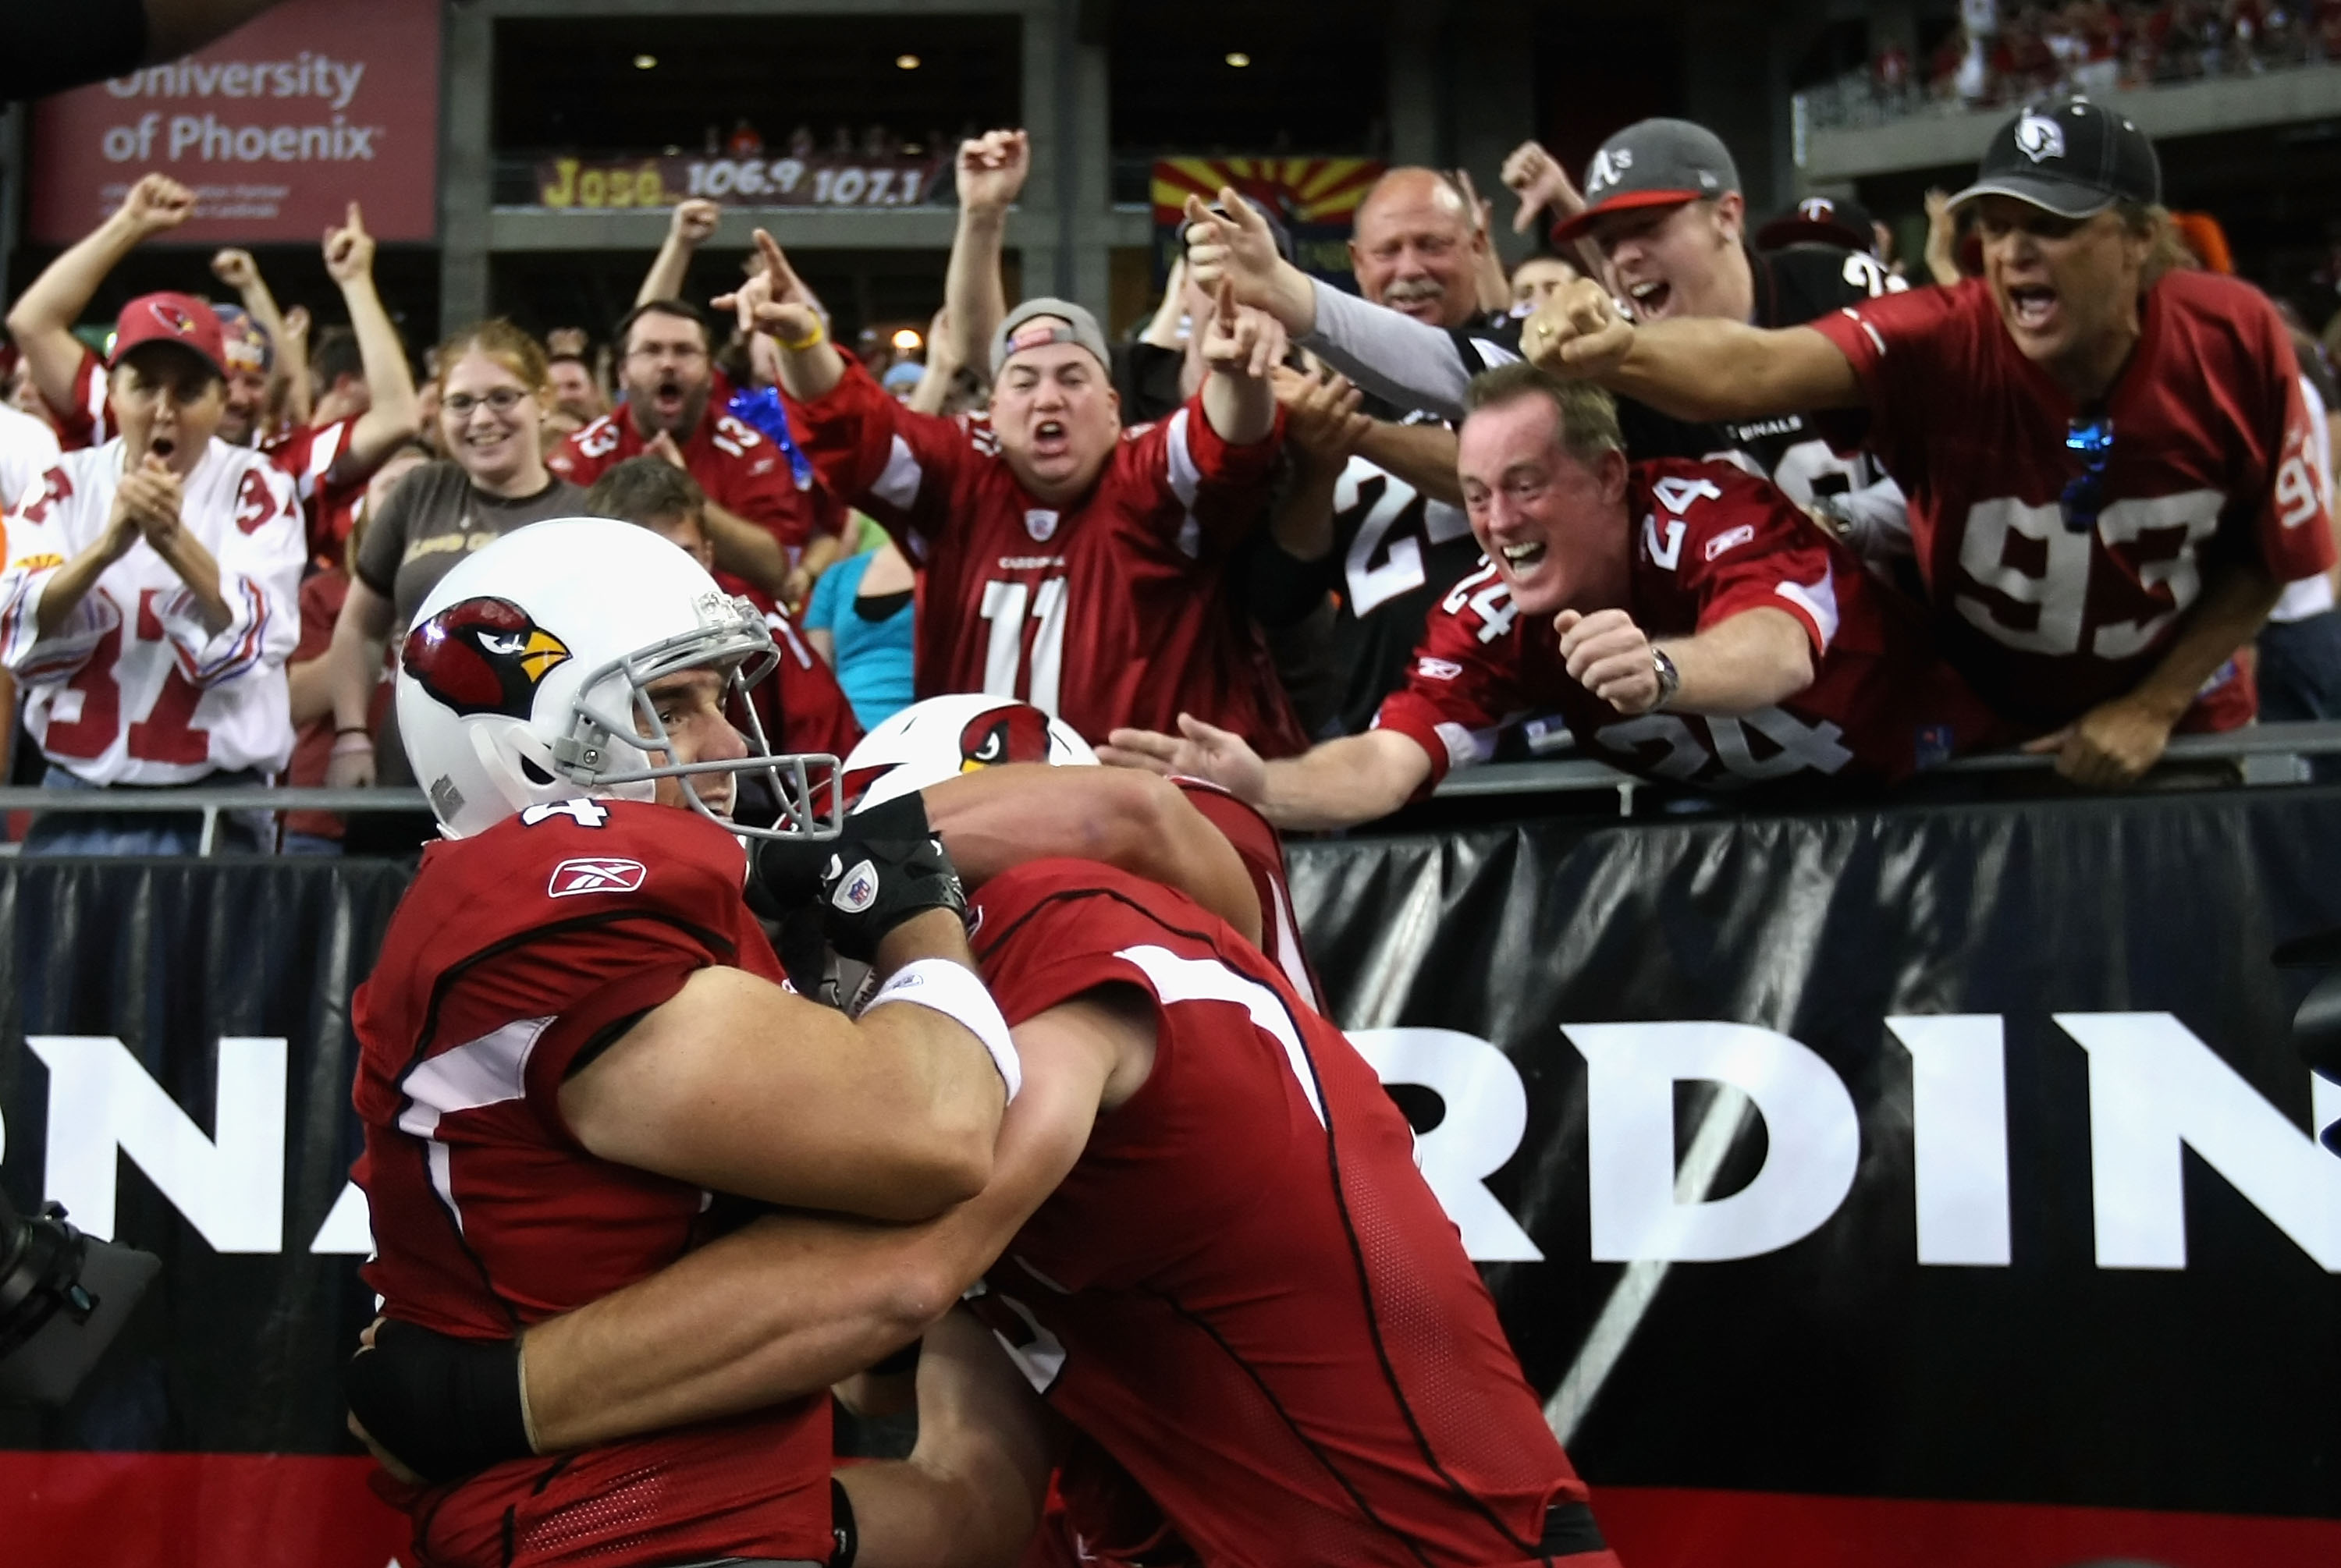 GLENDALE, AZ - DECEMBER 12:  Kicker Jay Feely #4 of the Arizona Cardinals celebrates with teamamtes and fans after scoring on a 5 yard rushing touchdown against the Denver Broncos during the second quarter of the NFL game at the University of Phoenix Stad